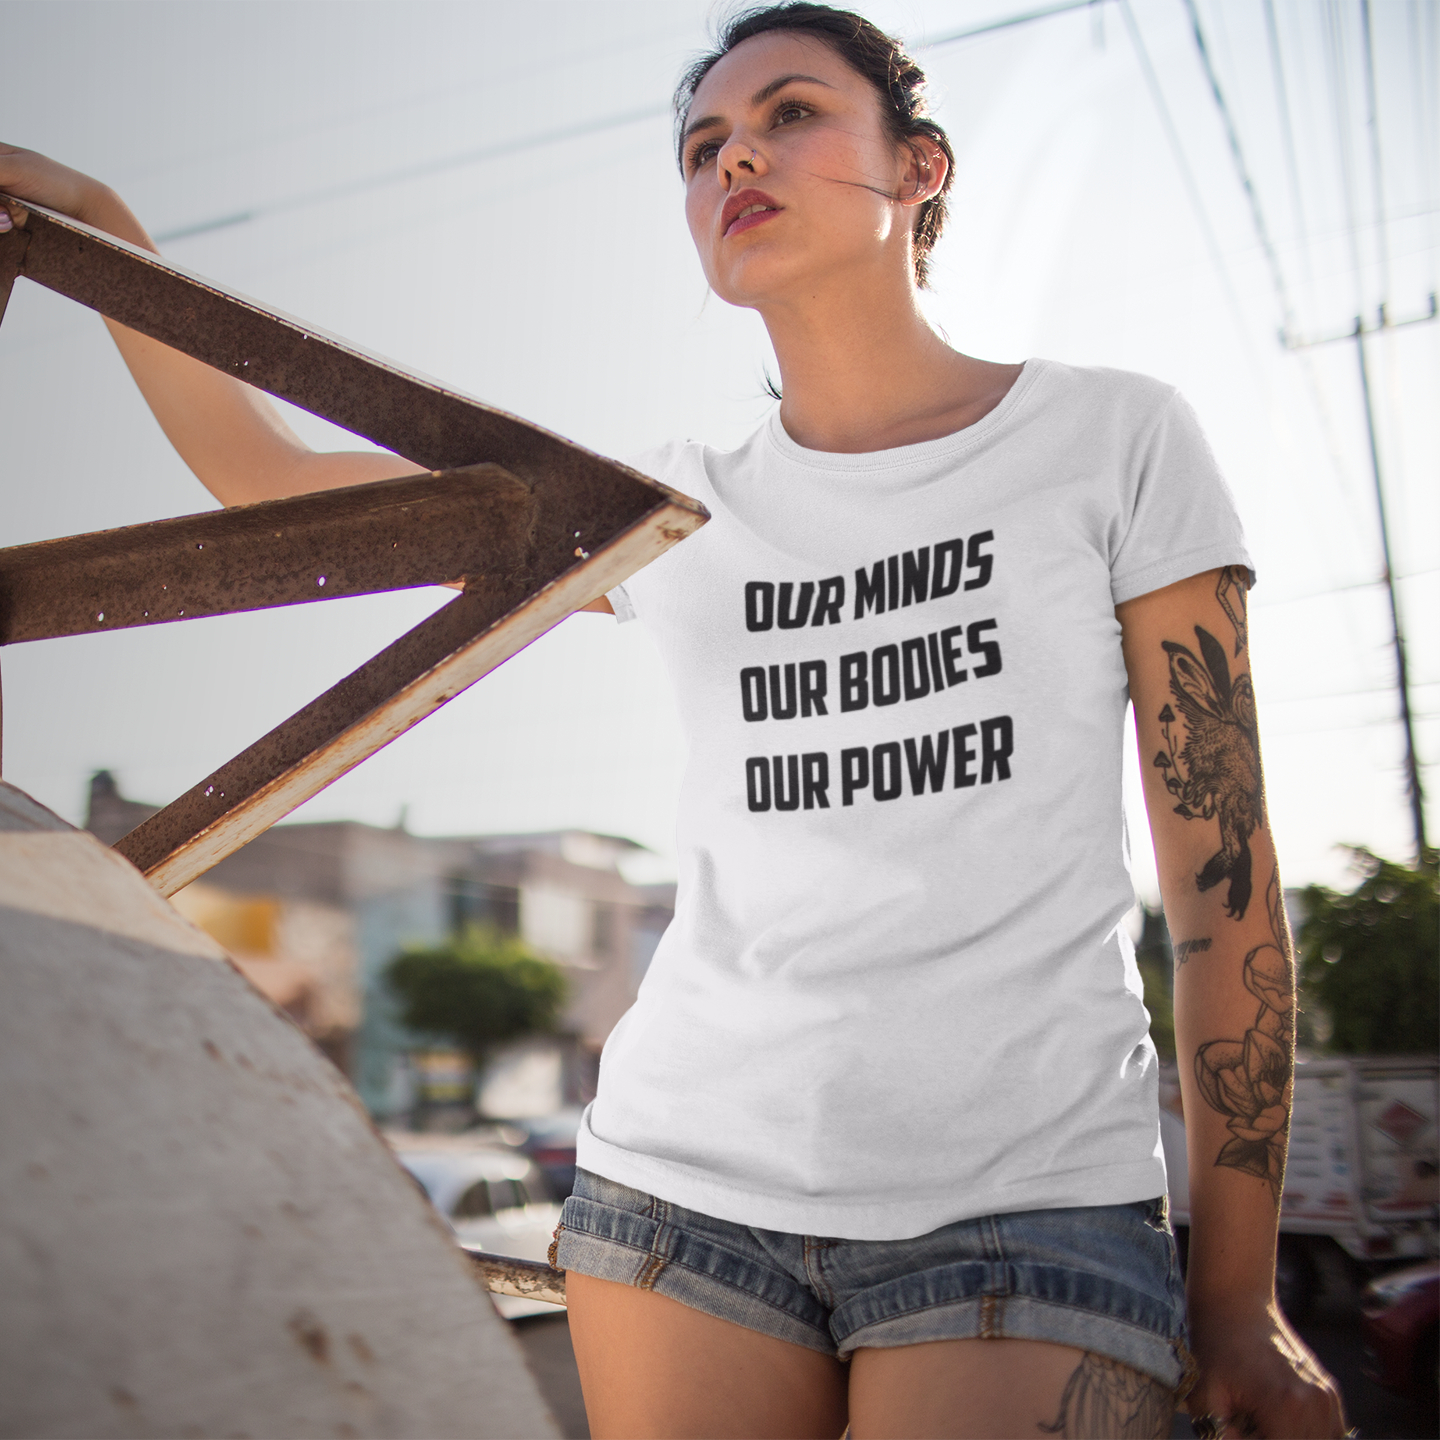 'Our minds, Our bodies, Our power' volwassene shirt